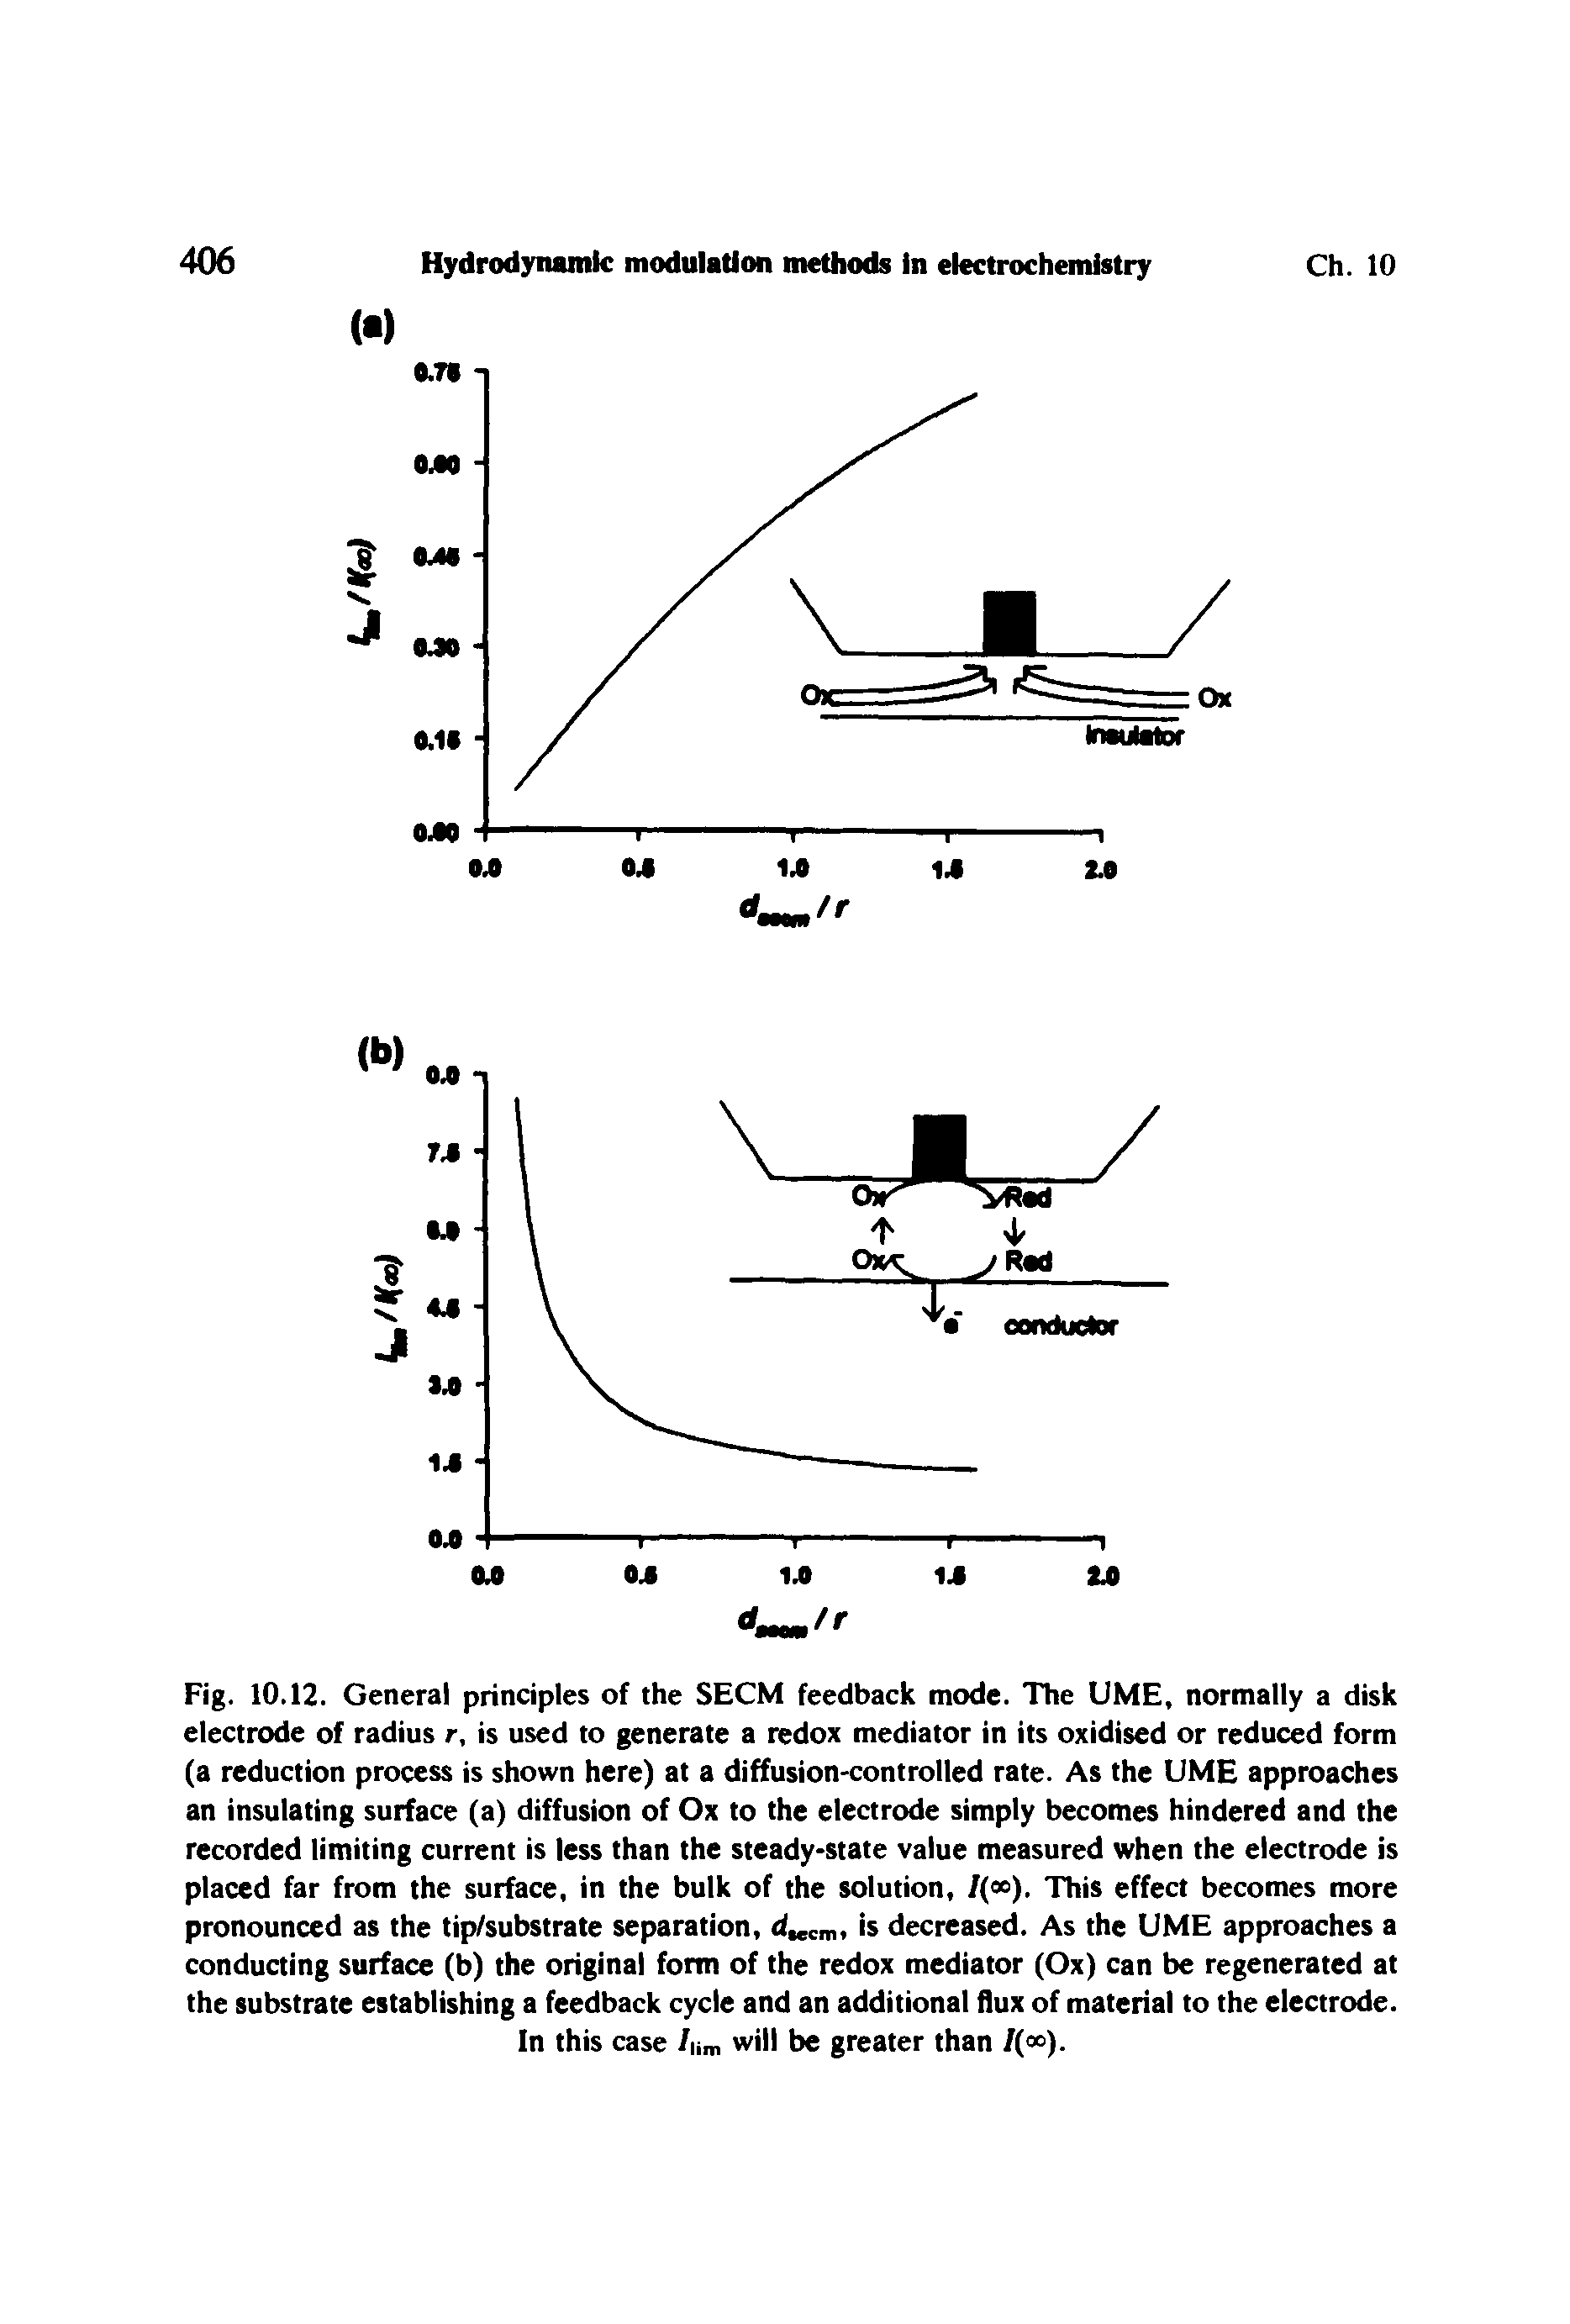 Fig. 10.12. General principles of the SECM feedback mode. The UME, normally a disk electrode of radius r, is used to generate a redox mediator in its oxidised or reduced form (a reduction process is shown here) at a diffusion-controlled rate. As the UME approaches an insulating surface (a) diffusion of Ox to the electrode simply becomes hindered and the recorded limiting current is less than the steady-state value measured when the electrode is placed far from the surface, in the bulk of the solution, /( >). This effect becomes more pronounced as the tip/substrate separation, dKcm, is decreased. As the UME approaches a conducting surface (b) the original form of the redox mediator (Ox) can be regenerated at the substrate establishing a feedback cycle and an additional flux of material to the electrode.